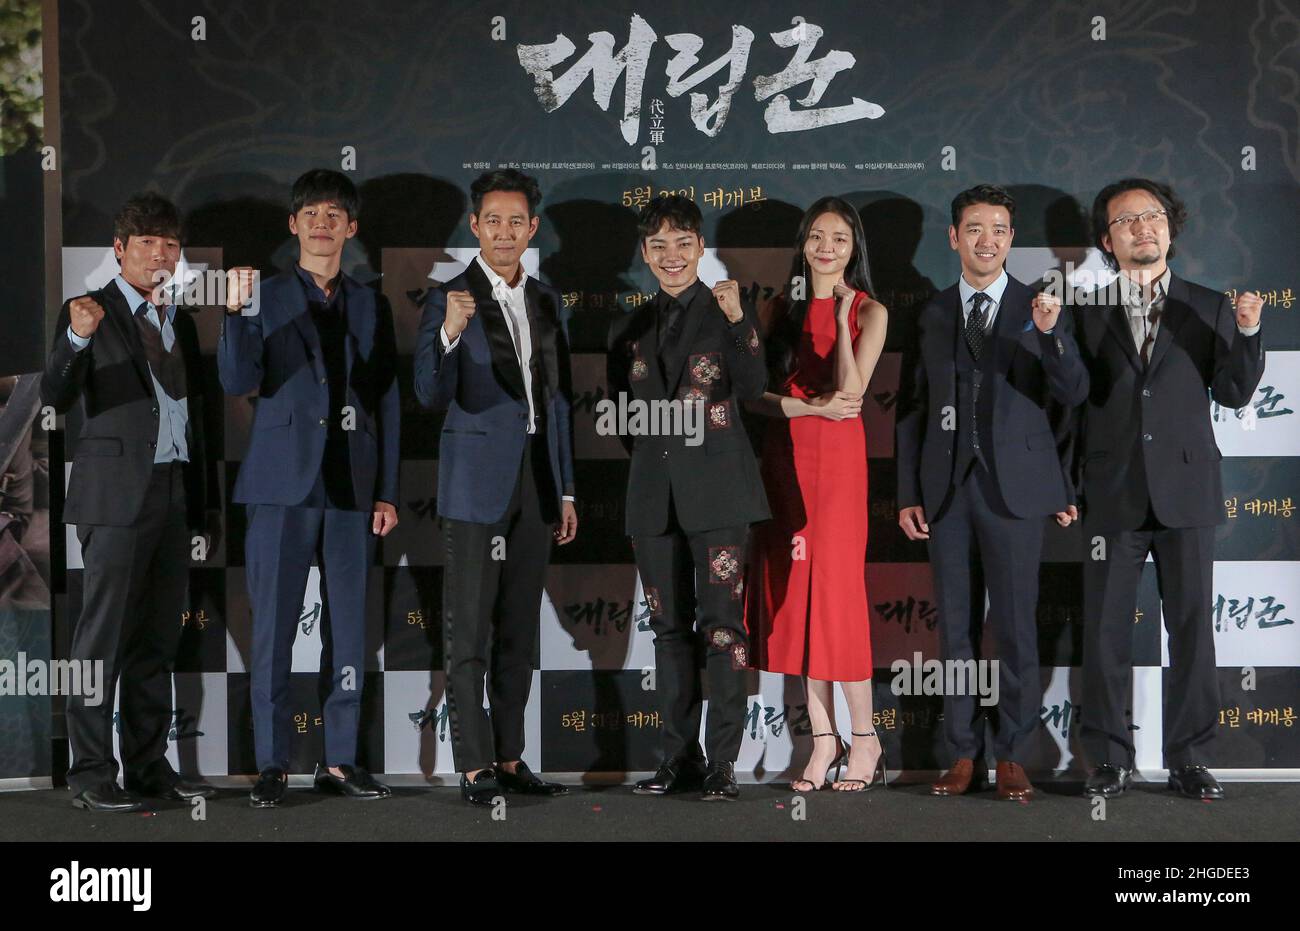 From left Actor Park Won Sang, Kim Mu Yeol, Lee Jung Jae, Yeo Jin Goo, Actress Esom, Actor Bae Soo Hyun, Director Jeong Yoon Cheol stand pose for photo call during their new film WARRIORS OF THE DAWN media show case in Seoul, South Korea. Stock Photo